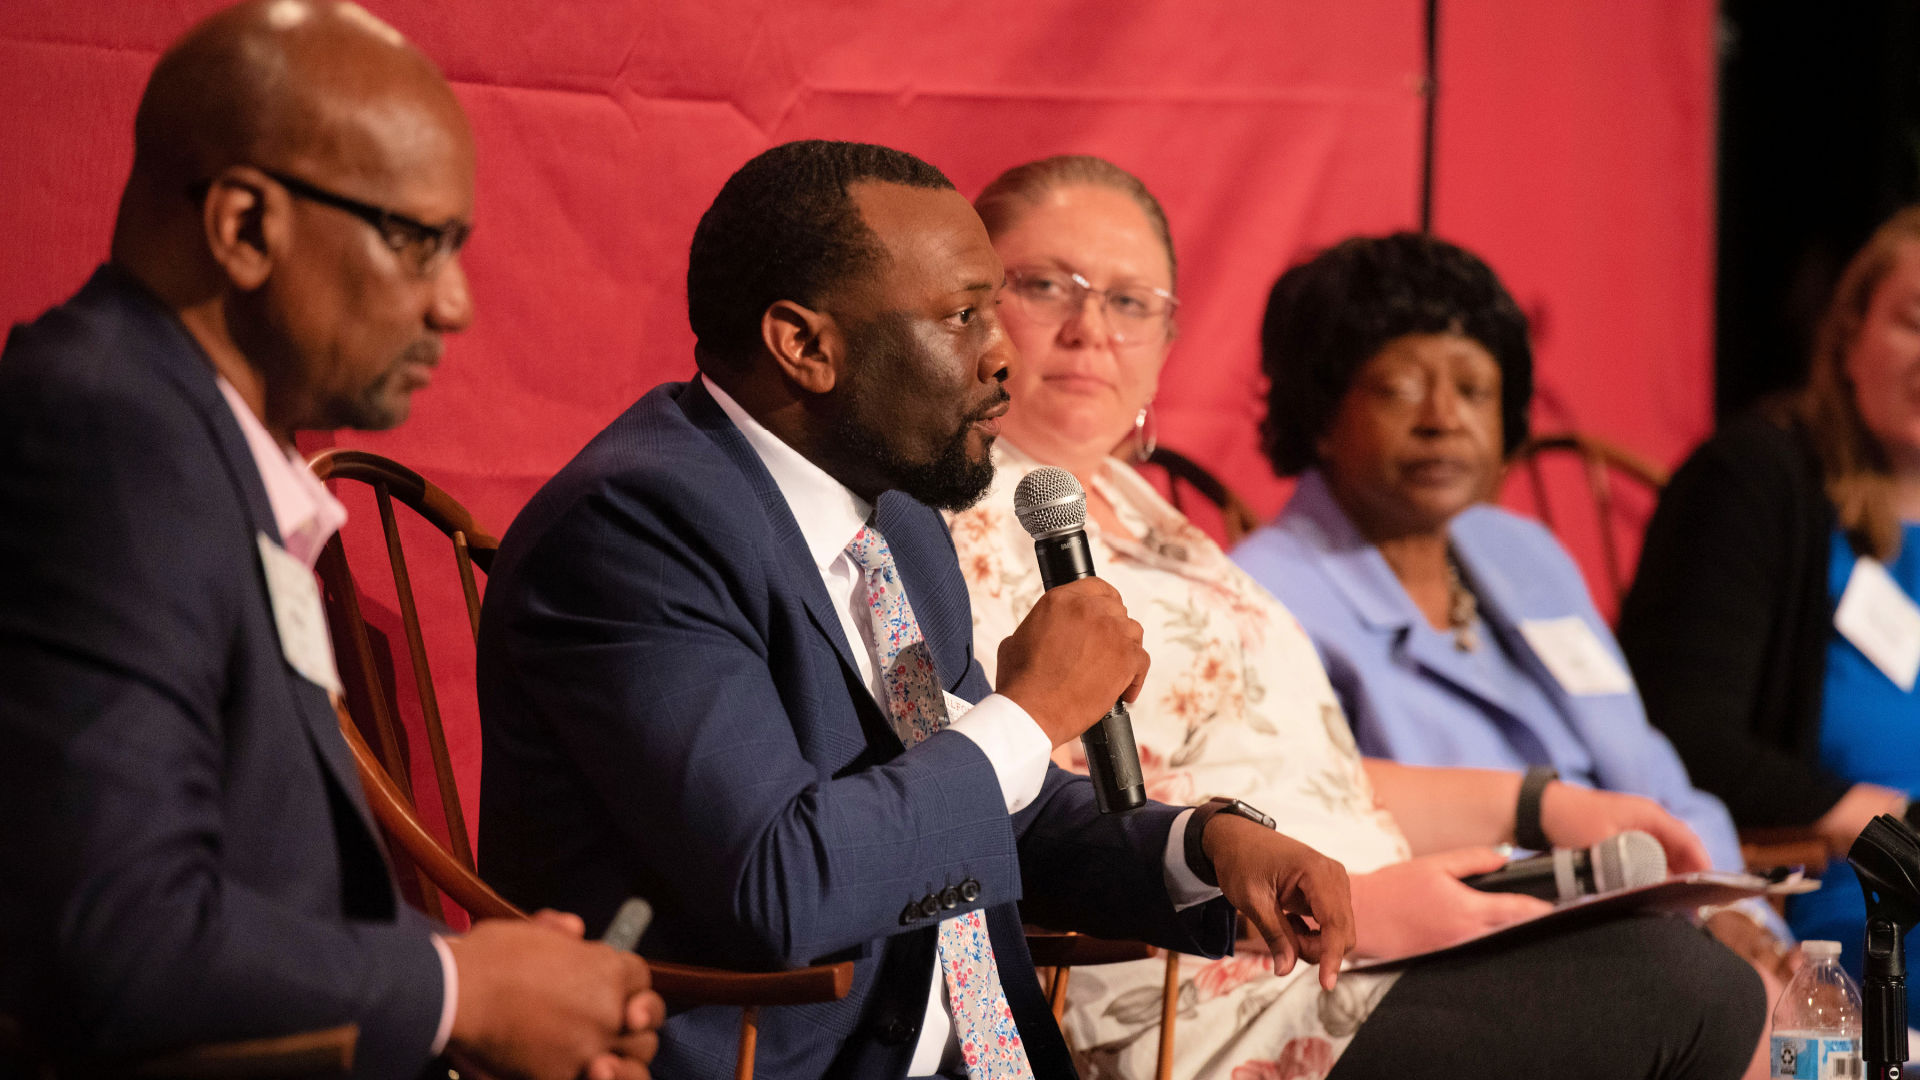 On stage at the Guilford Dialogues, seated in chairs, from left: Mac Sims, Marvin Price, Dayna Carr, and Joyce Hobson Johnson.